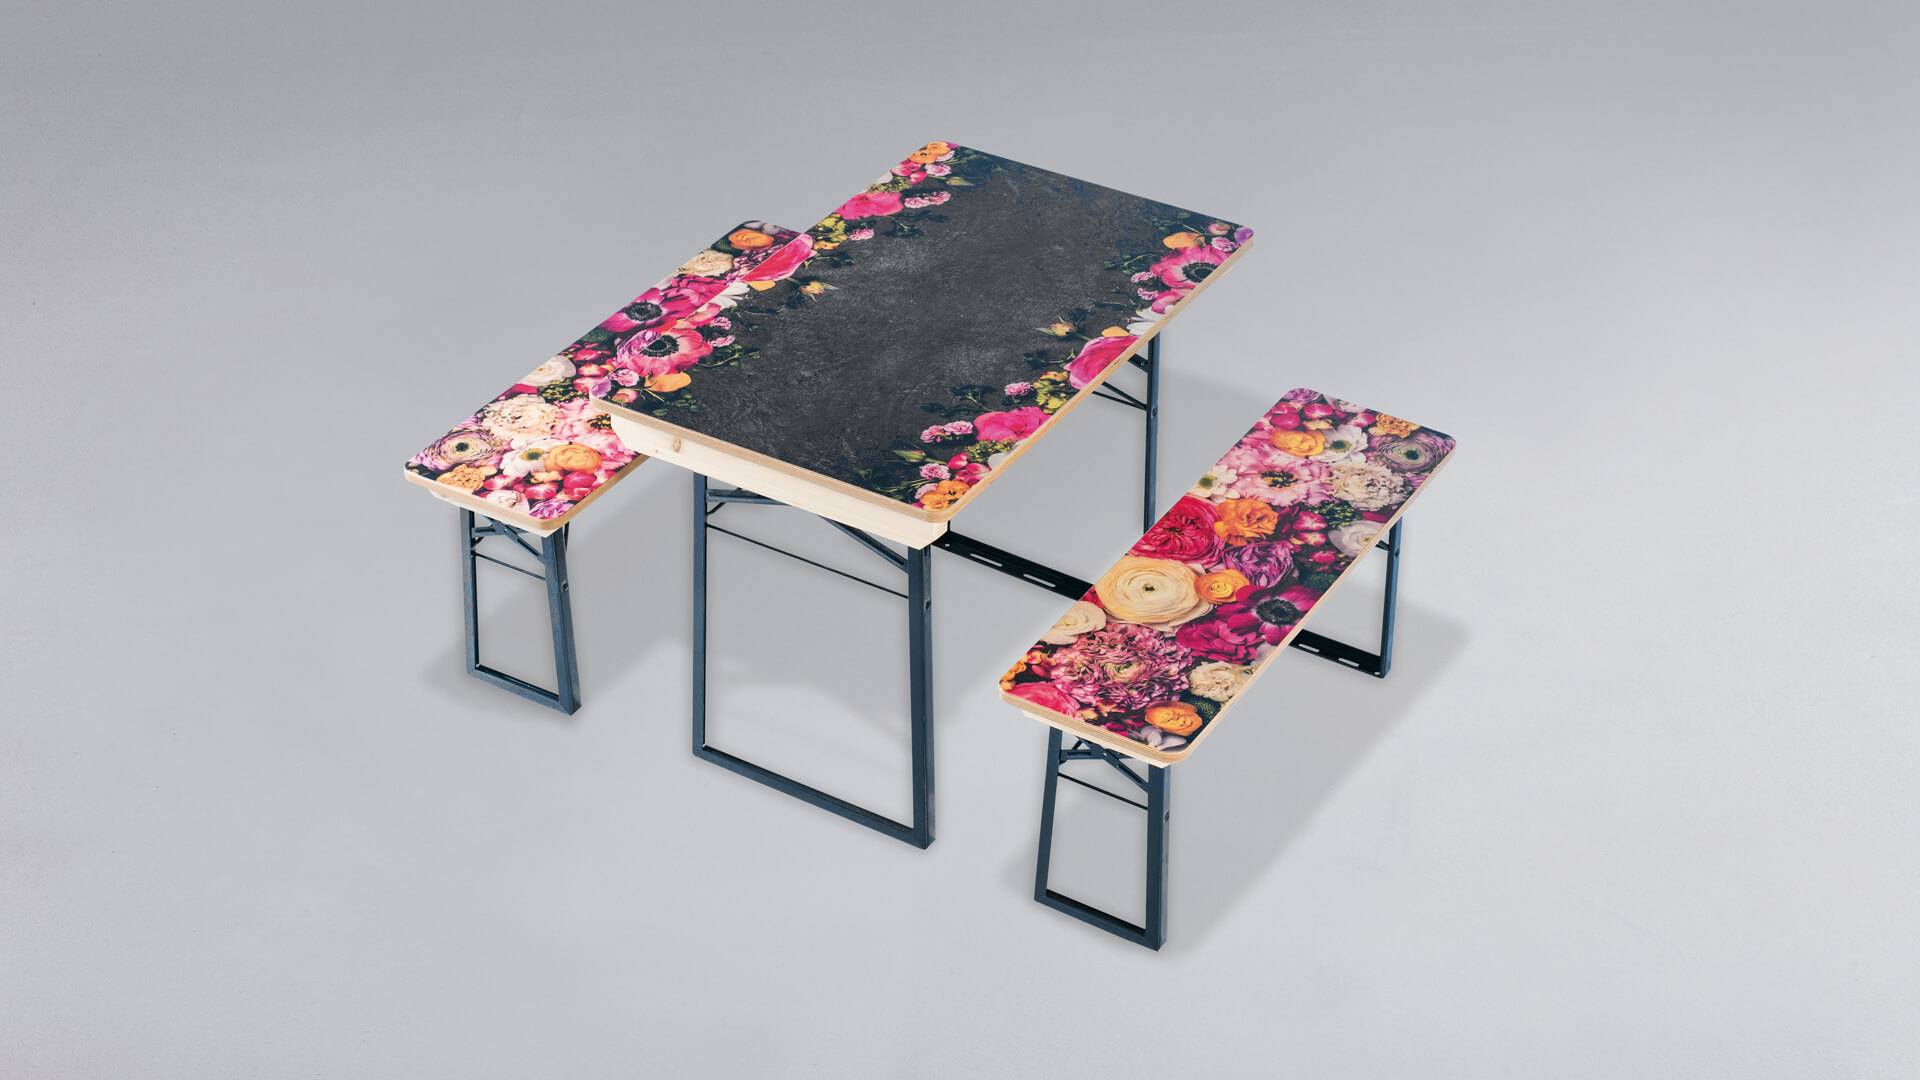 The small beer garden table set was printed with flowers by means of digital printing.